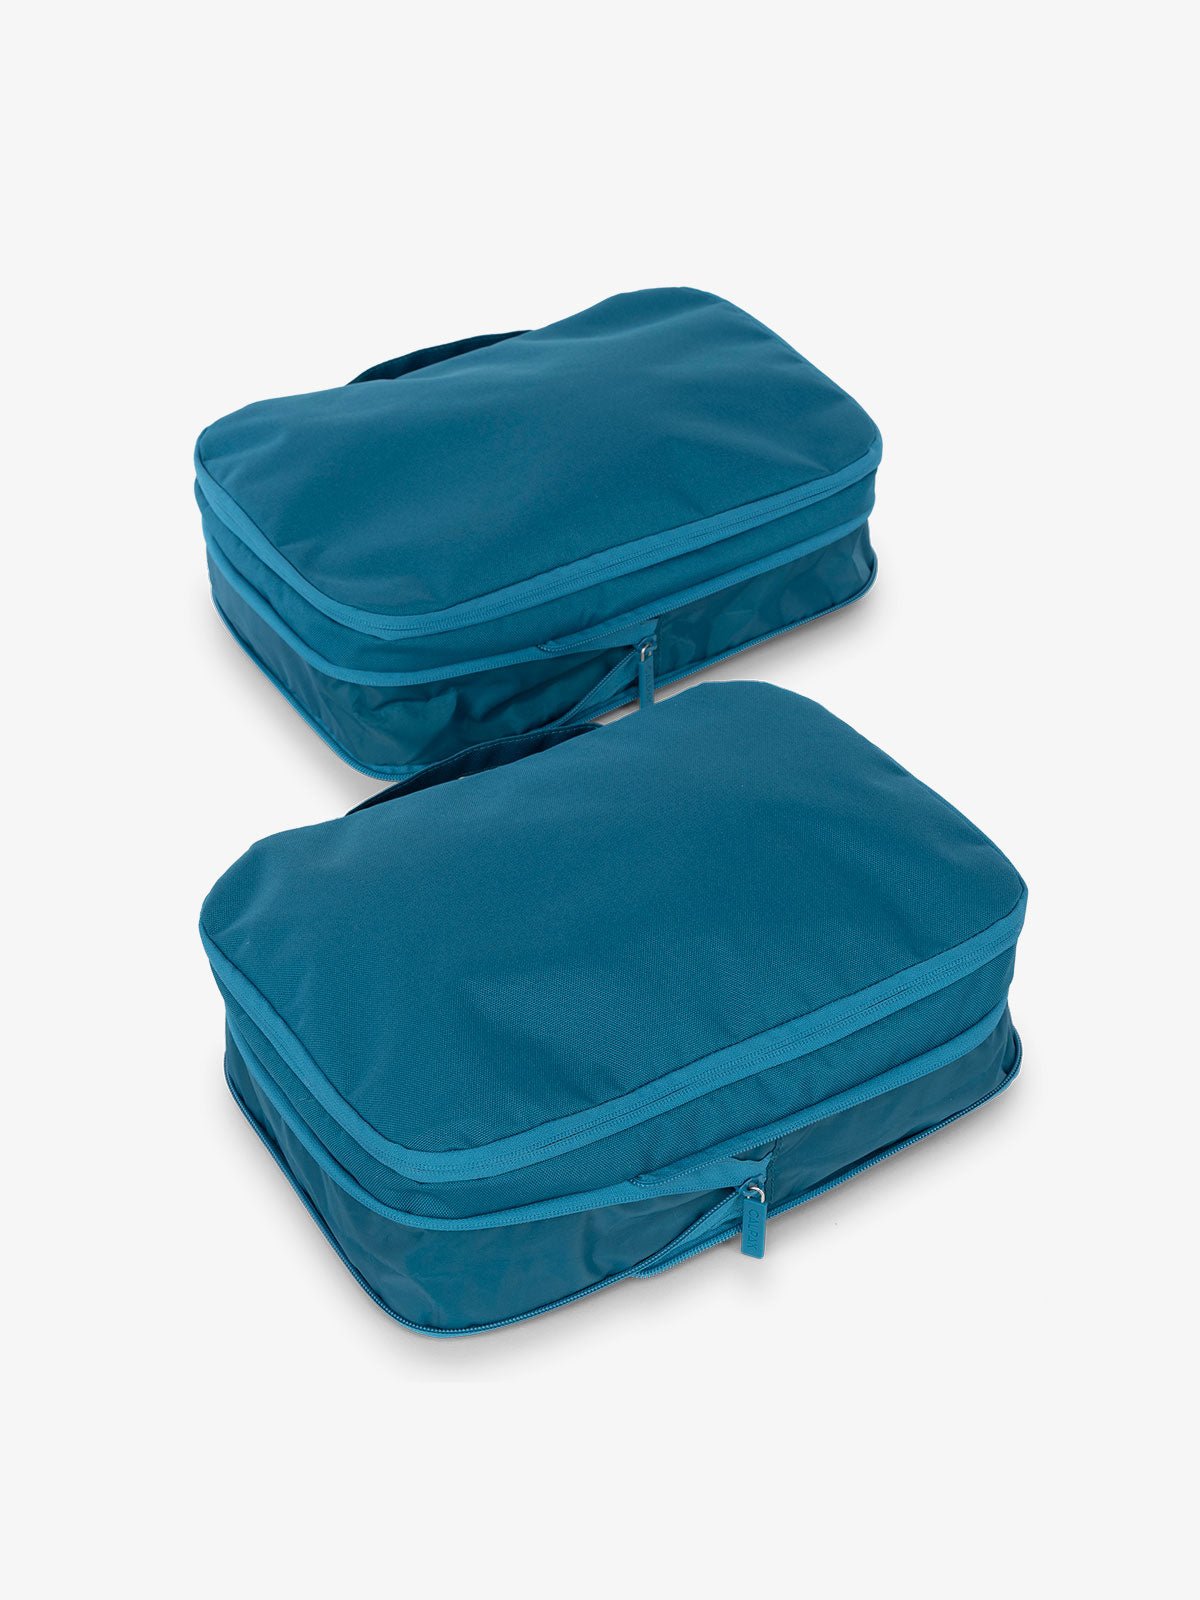 CALPAK compression packing cubes with handles in dark blue